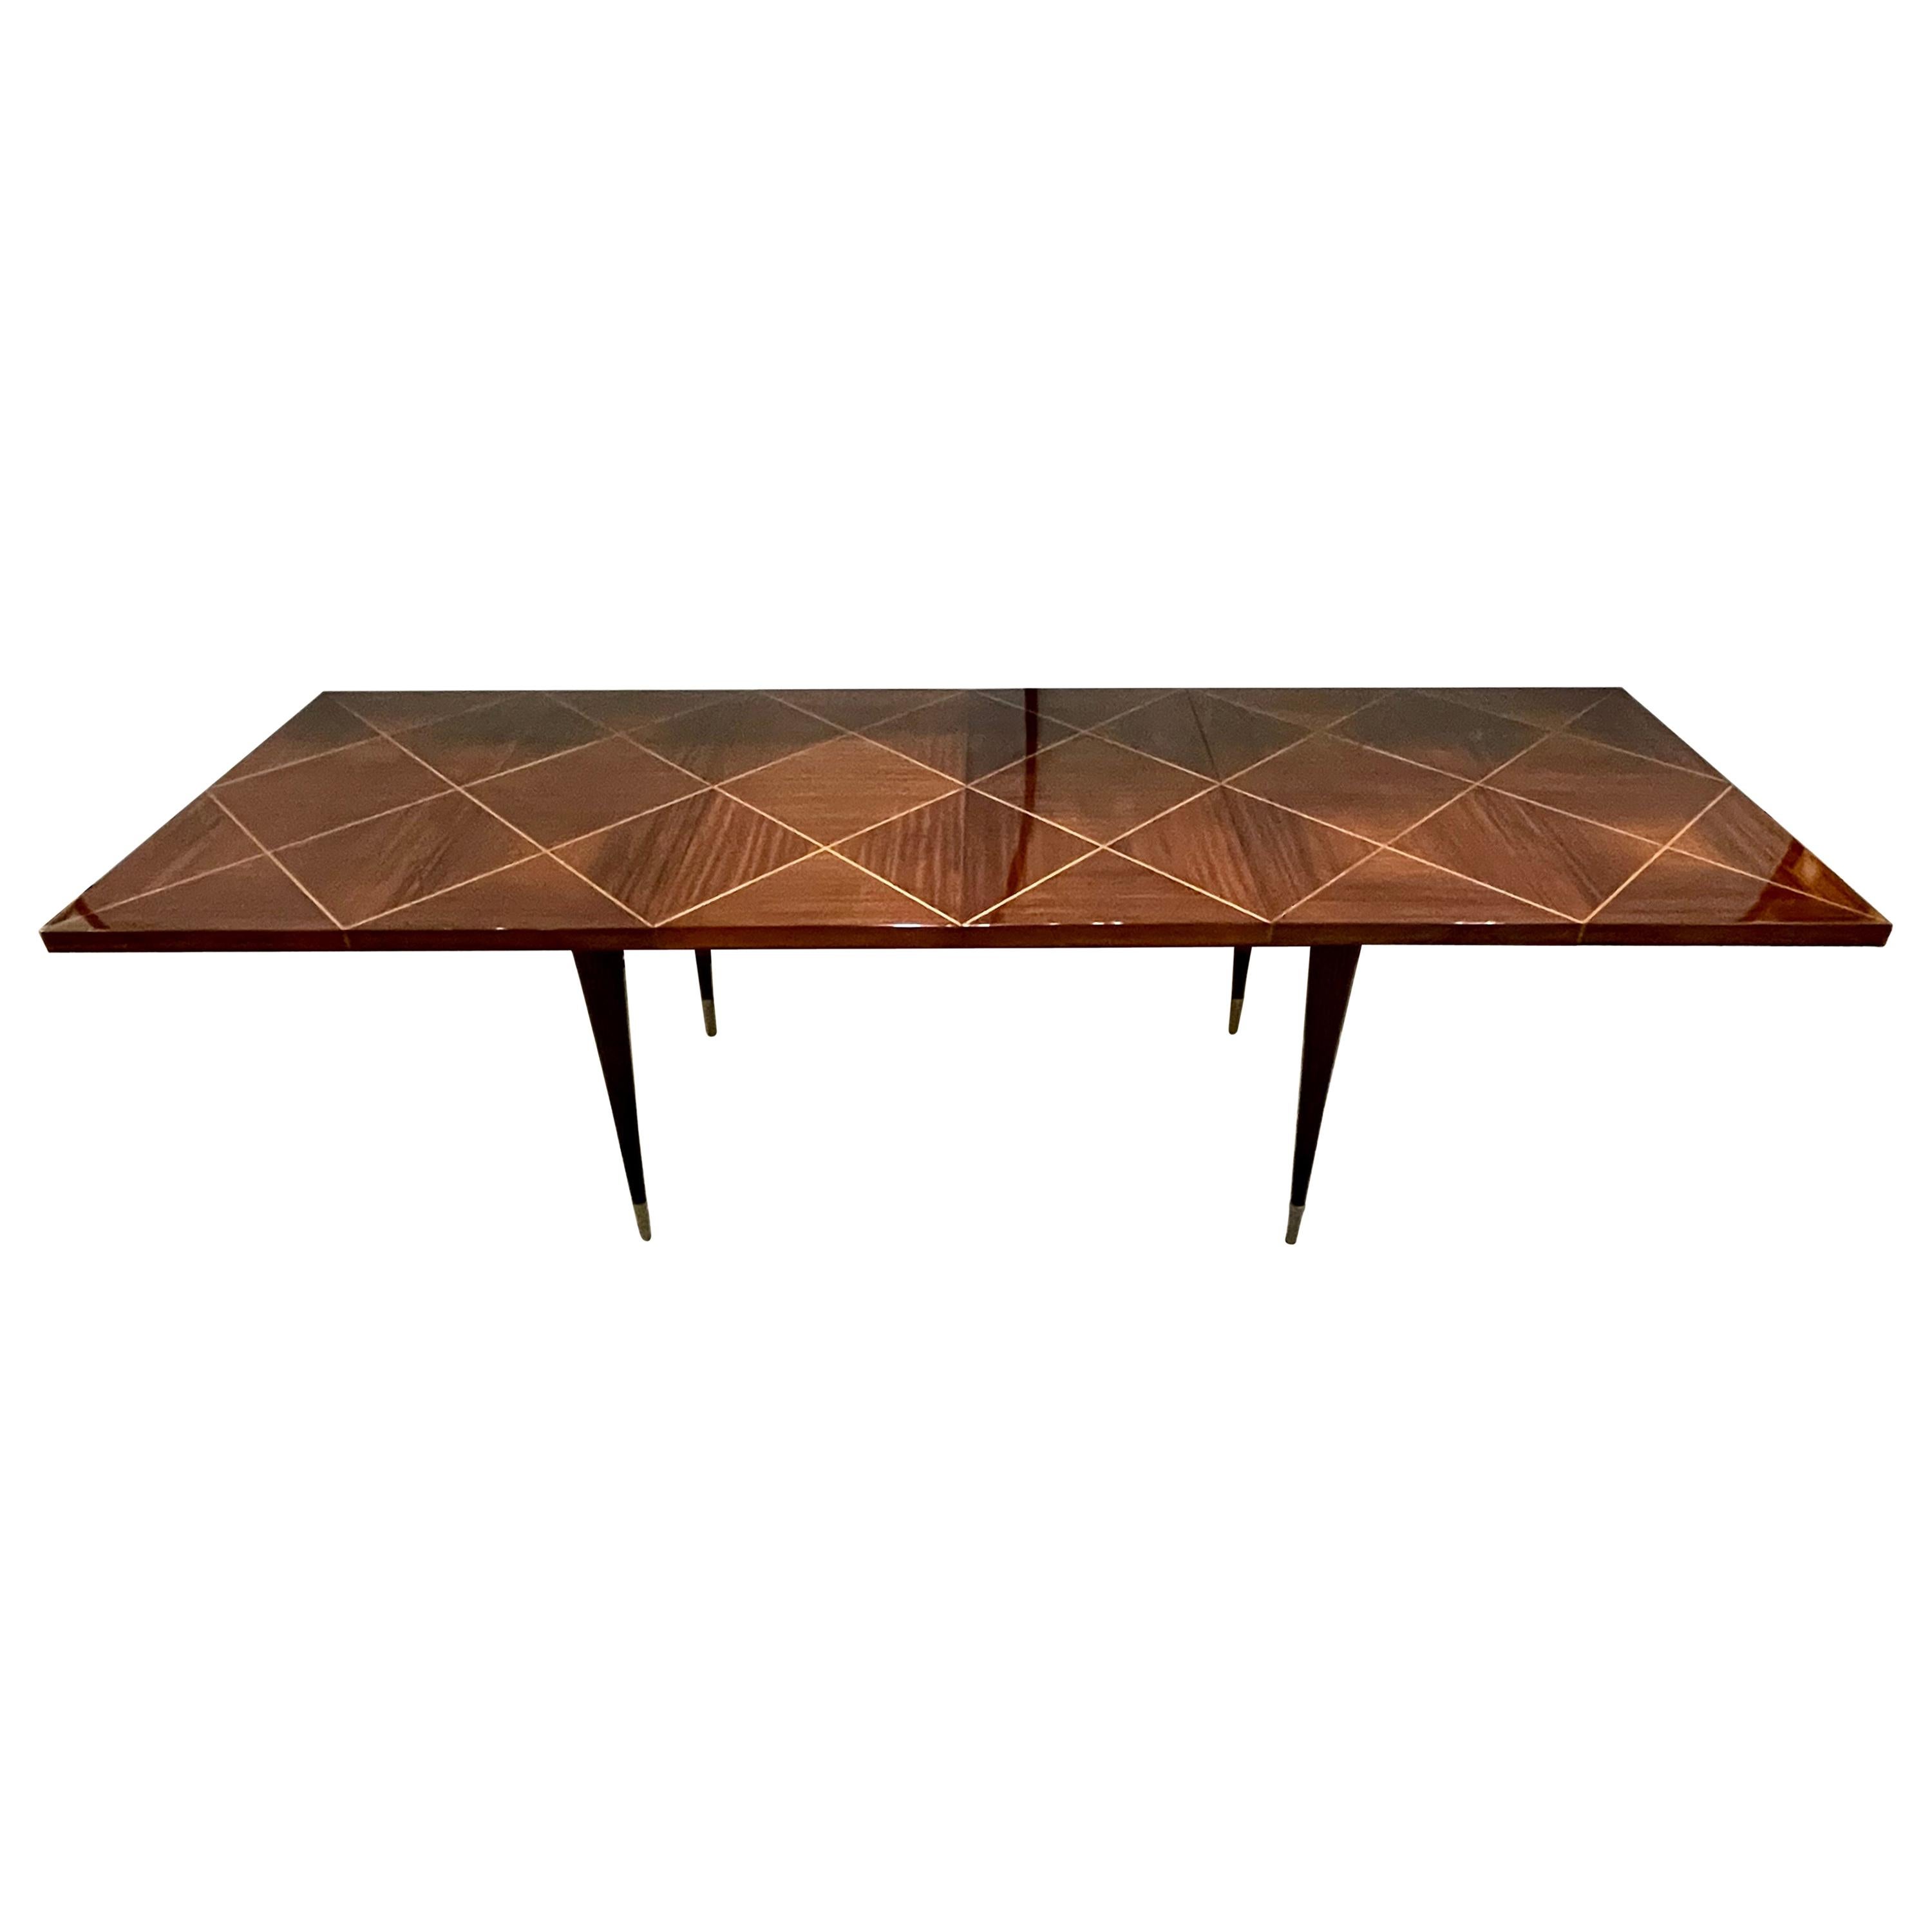 A Tommi Parzinger Originals Dining Table Fully Refinished with Two Leaves